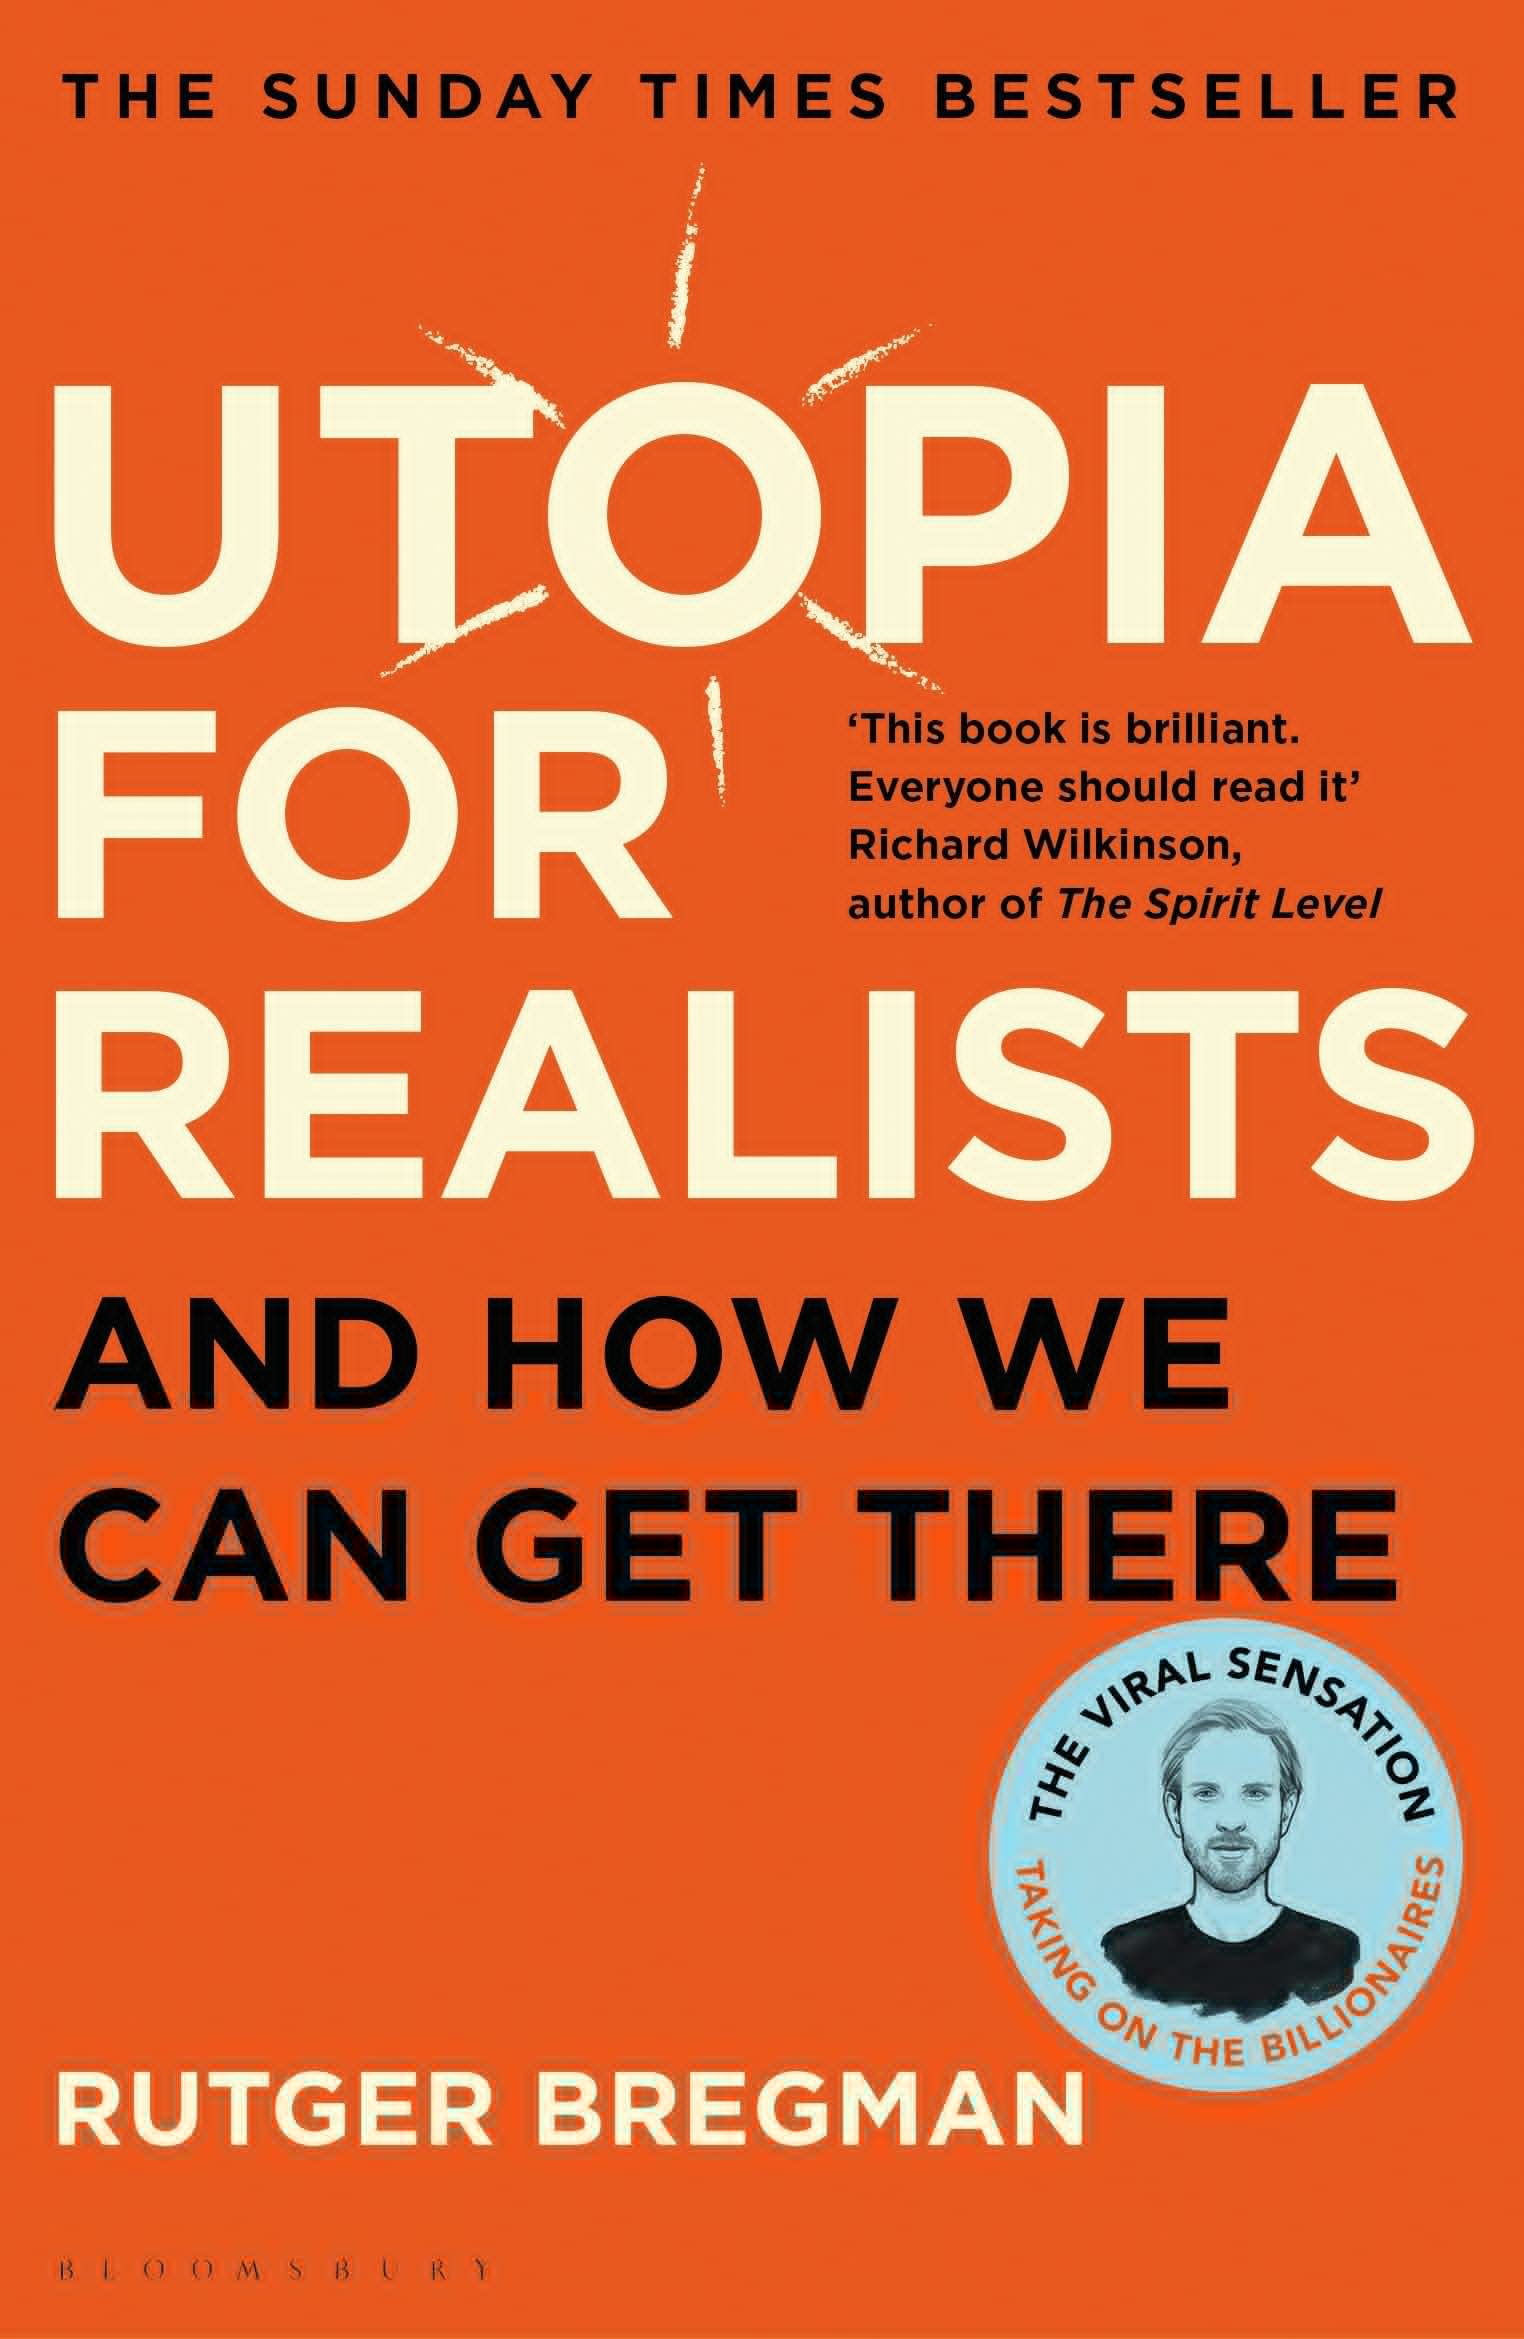 The book cover for Rutger Bregman's book, Utopia for Realists